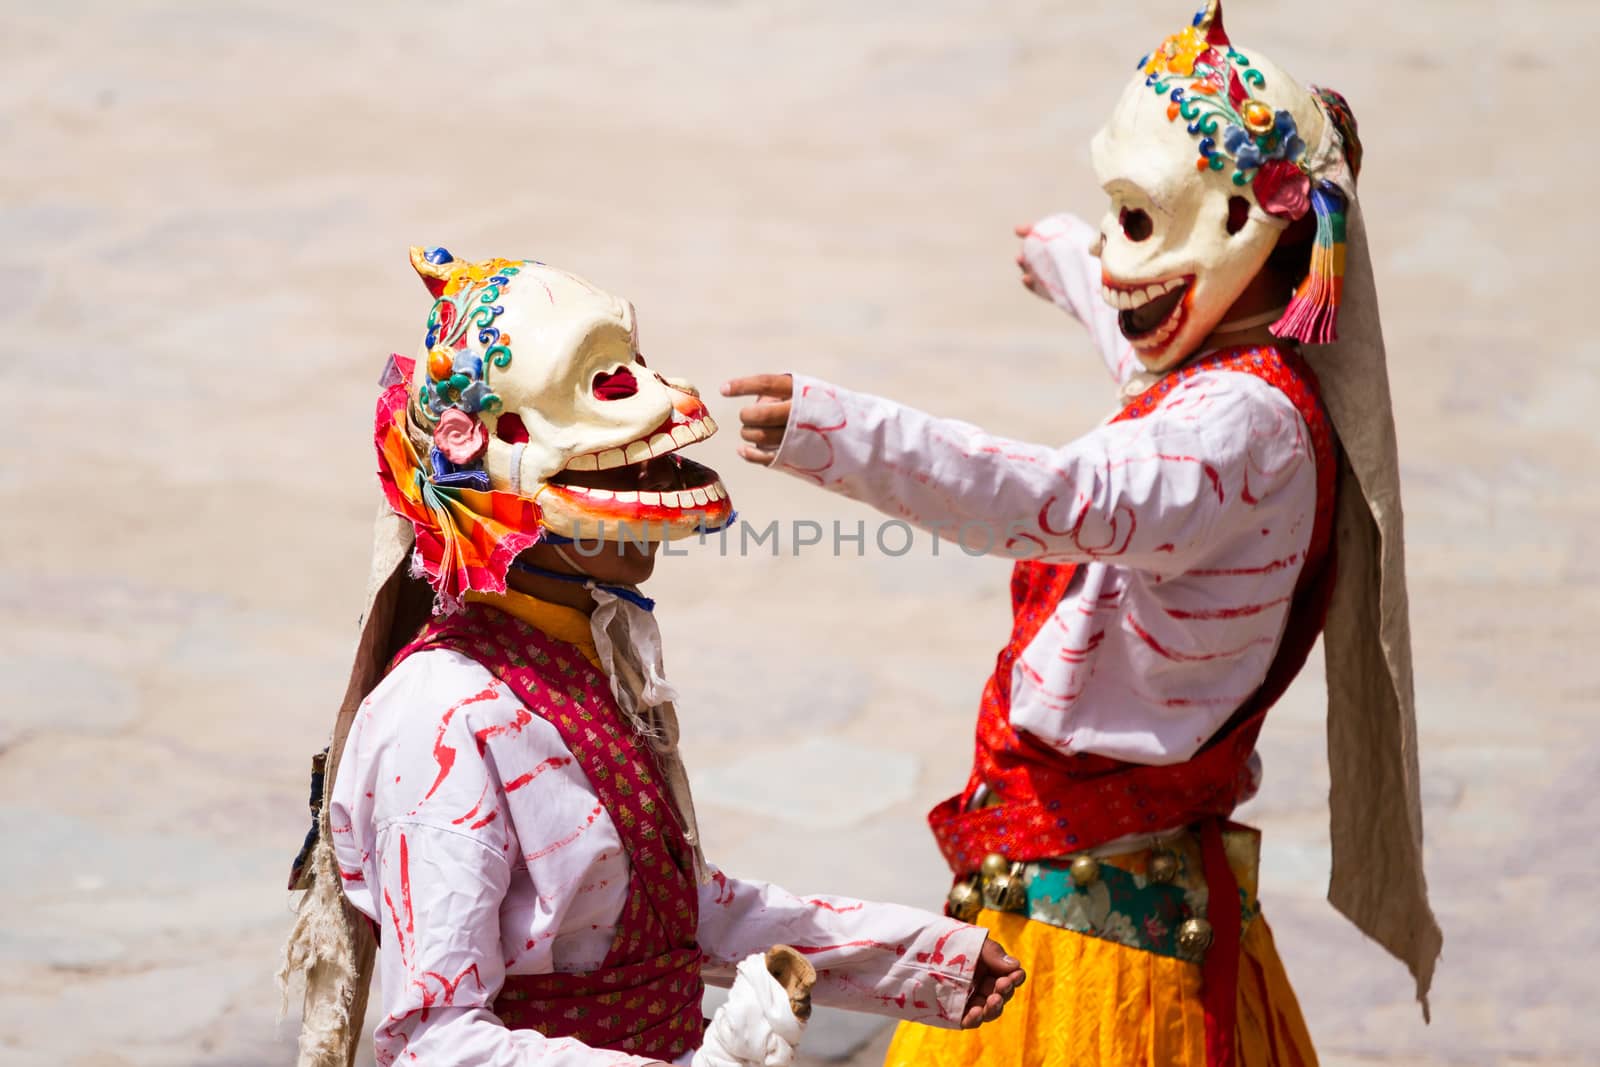 Monks performs a religious masked and costumed mystery dance of Tibetan Buddhism during the Cham Dance Festival by straannick